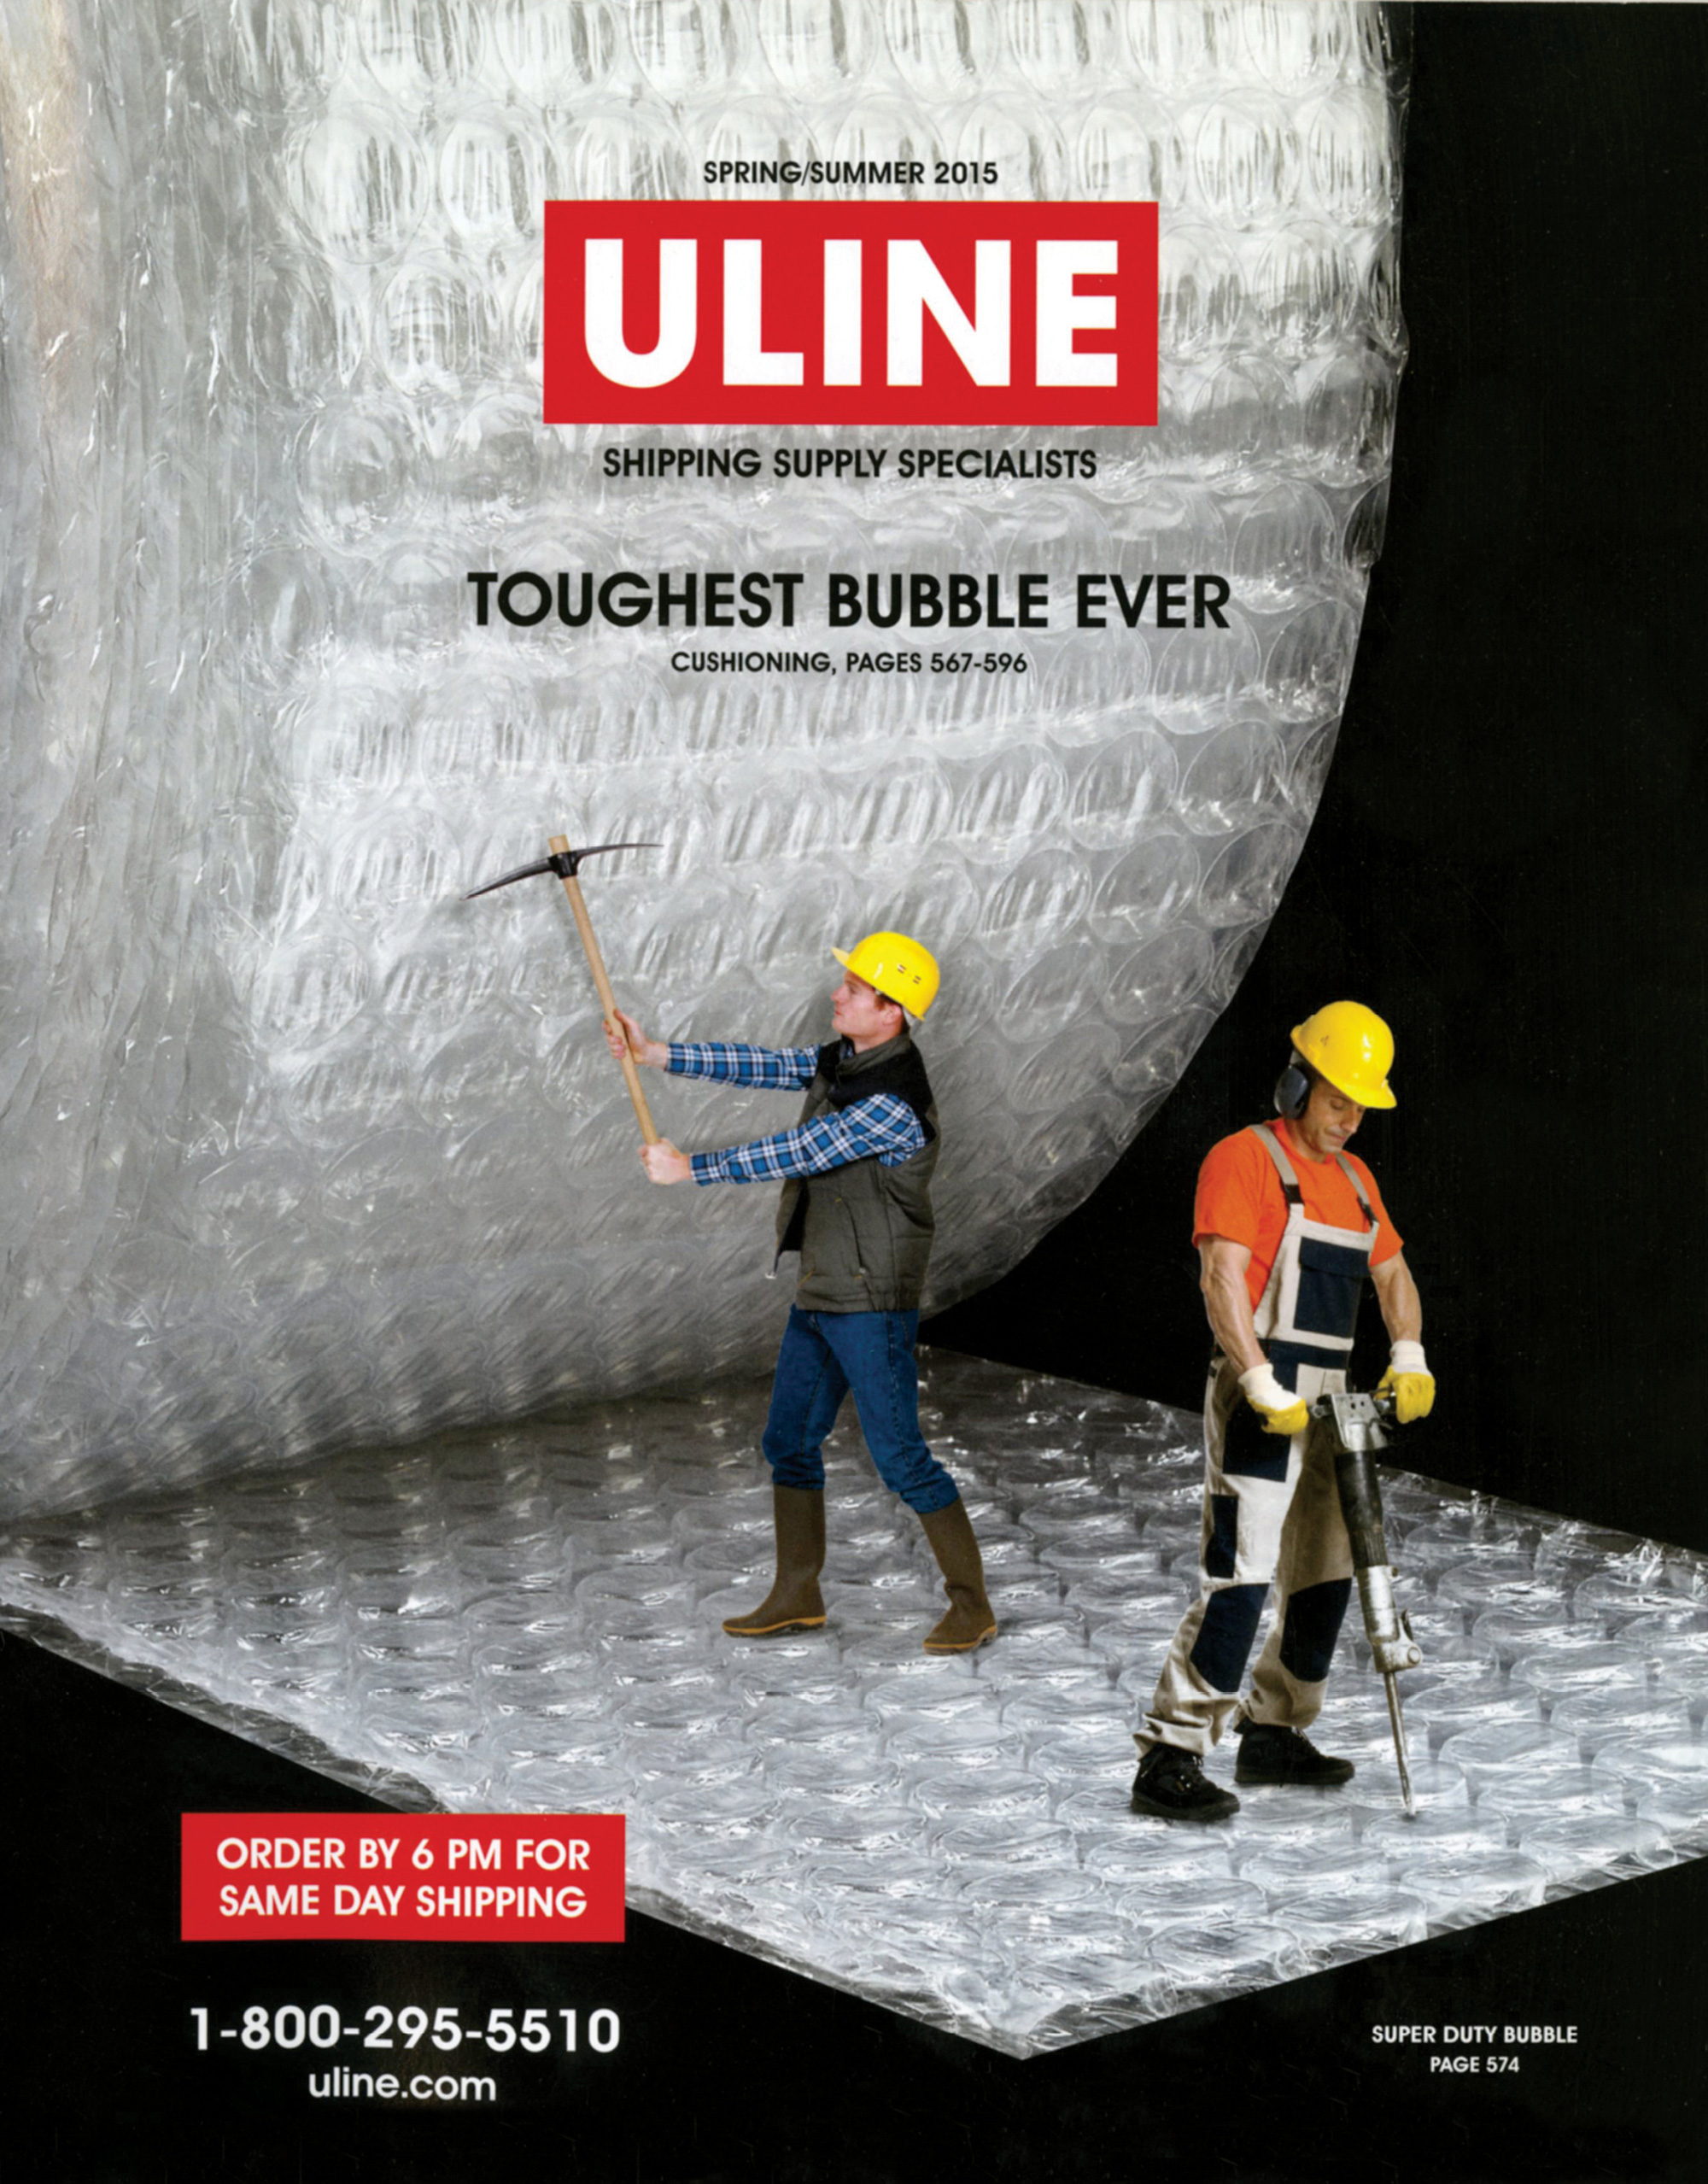 Like many small businesses, we purchase most of our packing supplies through Uline. Though one of the most prized publications in our office, the company’s catalogue has always had utterly unmemorable covers. And then, in the spring of 2015, Uline suddenly began to mail out catalogues whose covers showcased humans radically rethinking their relationship with packing materials. There were a couple more covers like these, but by spring of 2016, the company had, alas, reverted back to its regular fare.